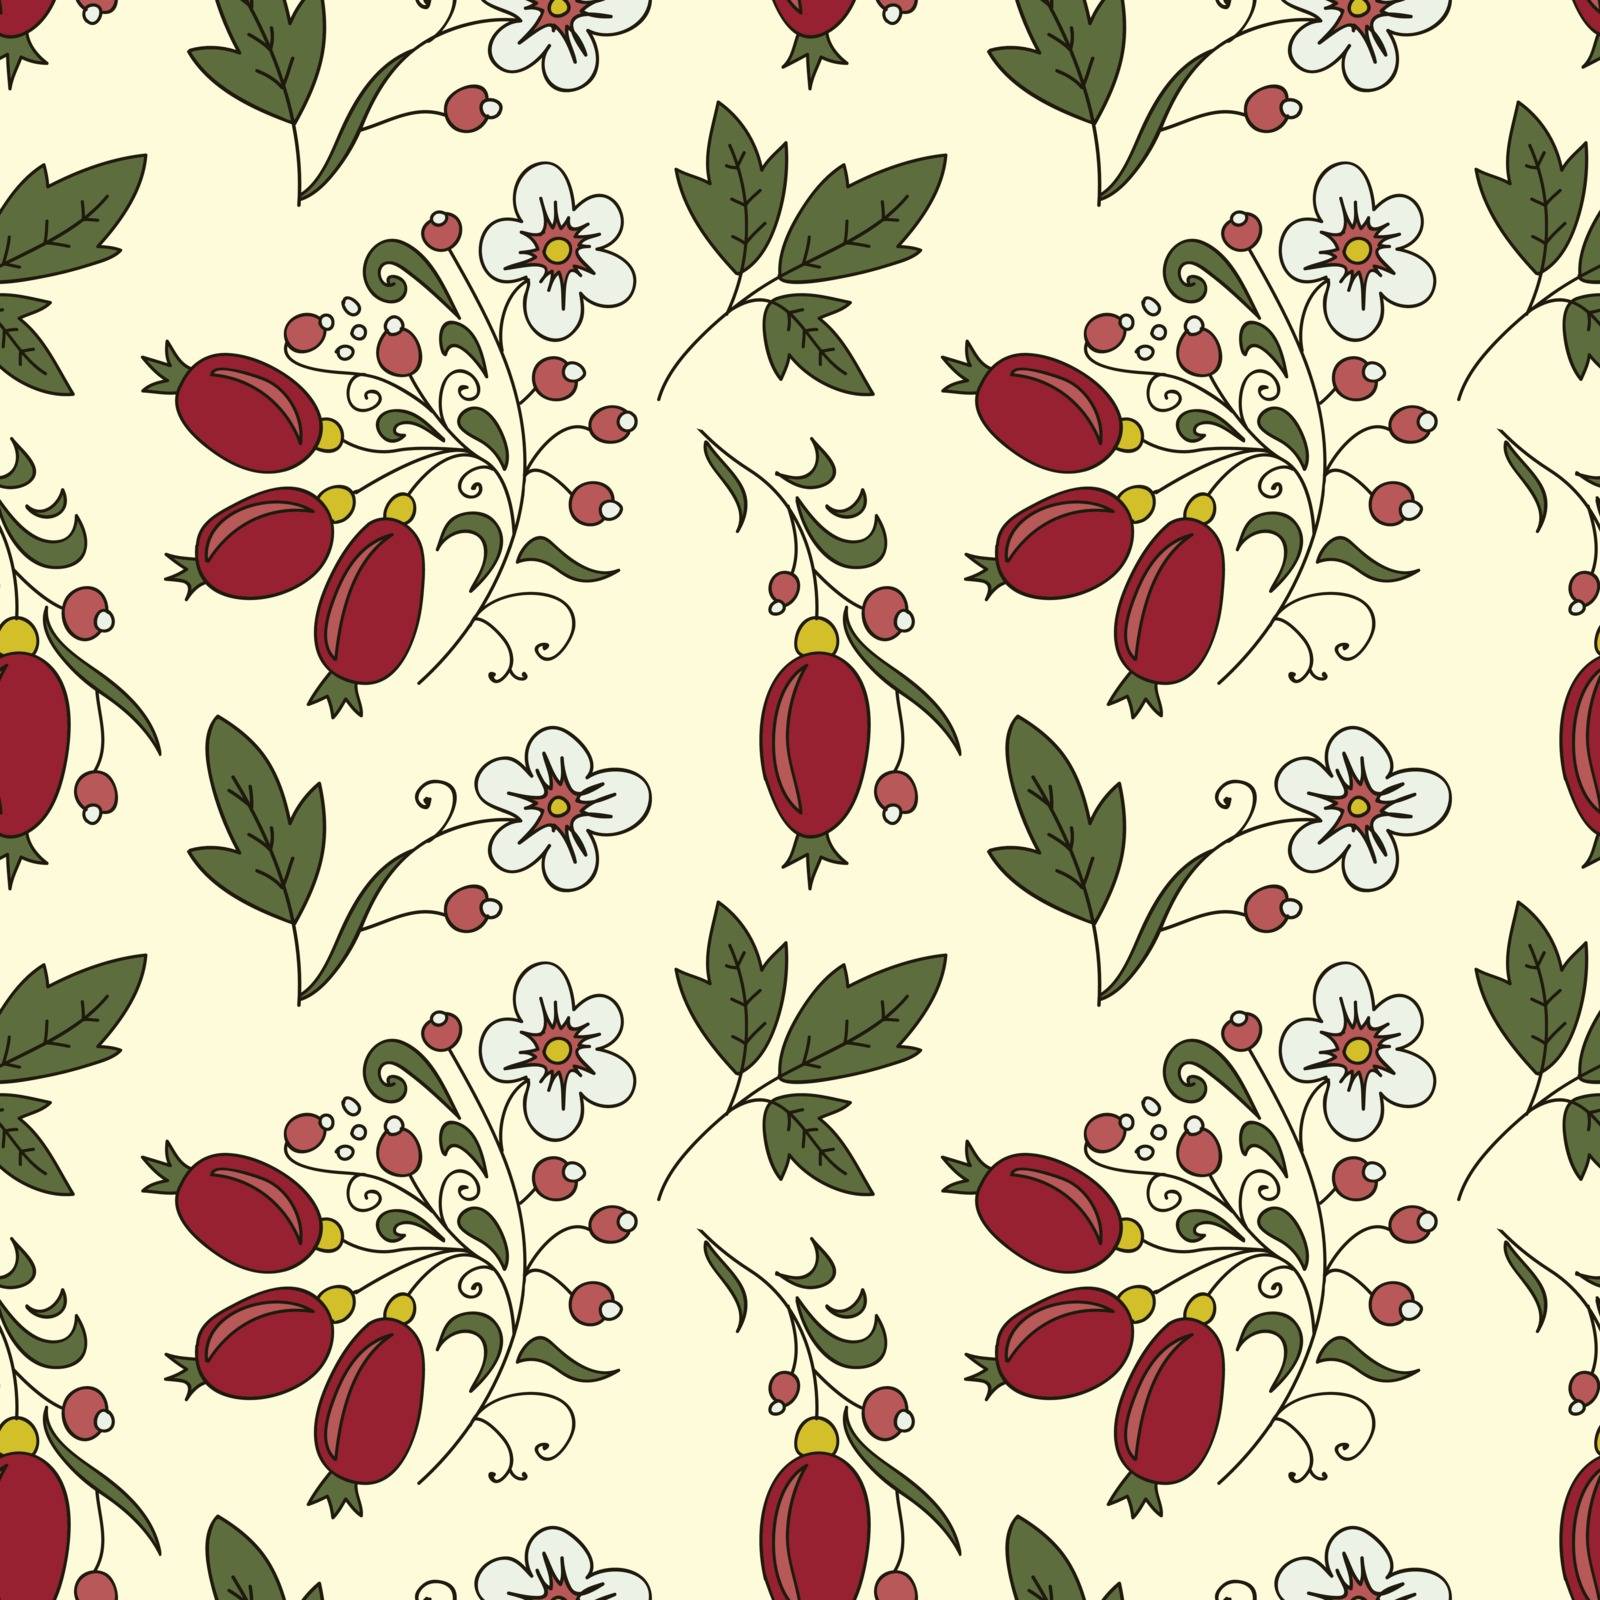 seamless texture barberry with white flowers on a beige background. Use as a pattern fill, backdrop, seamless texture